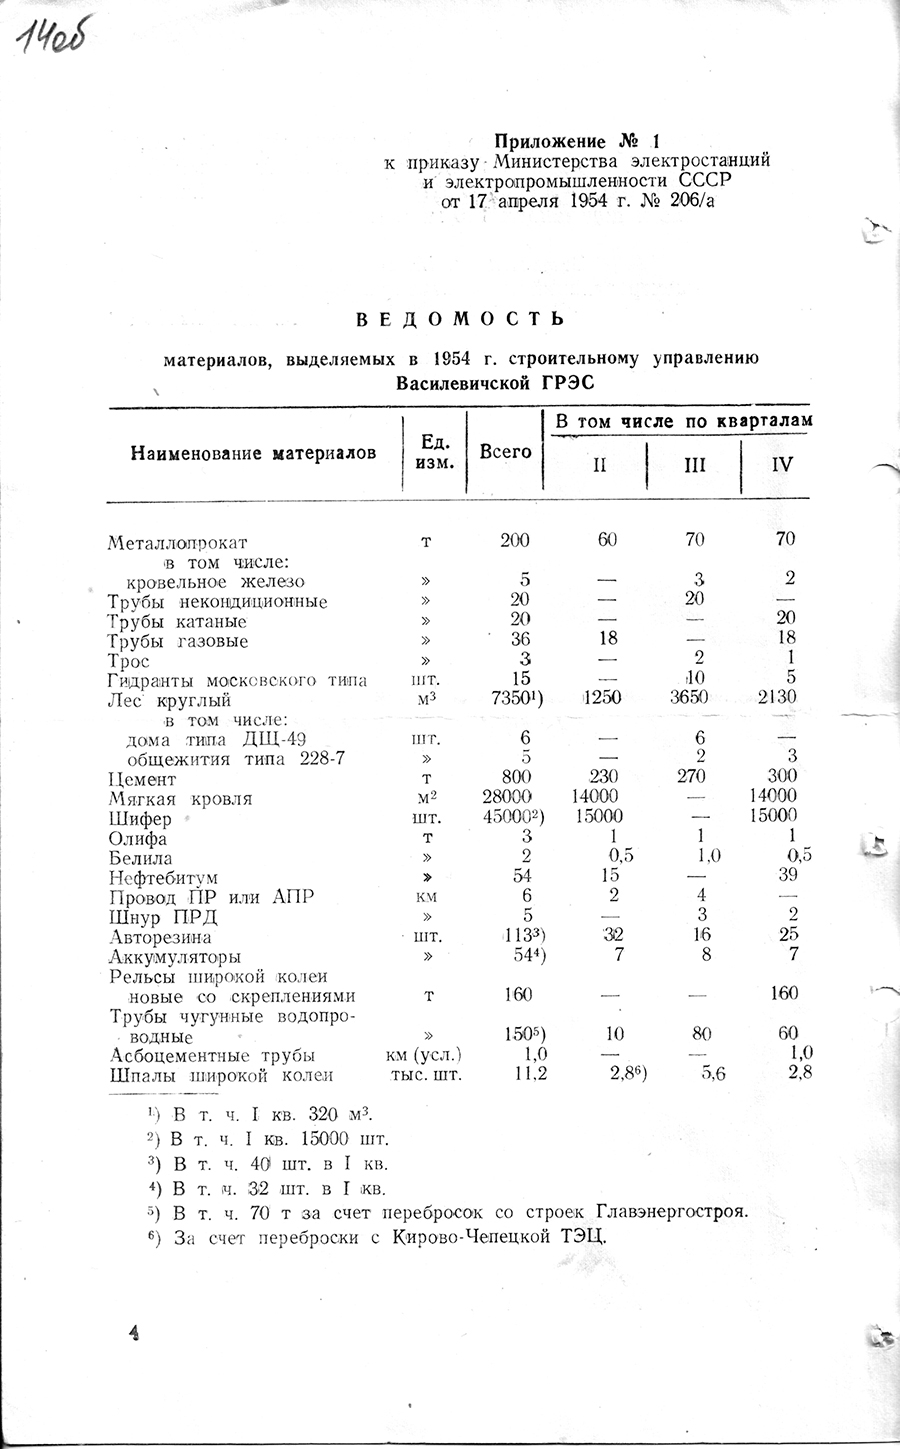 Order No. 206/A of the Ministry of Power Plants and Electric Medications of the USSR on the forcing of the construction of the Vasilevichi State District Power Plant-с. 3